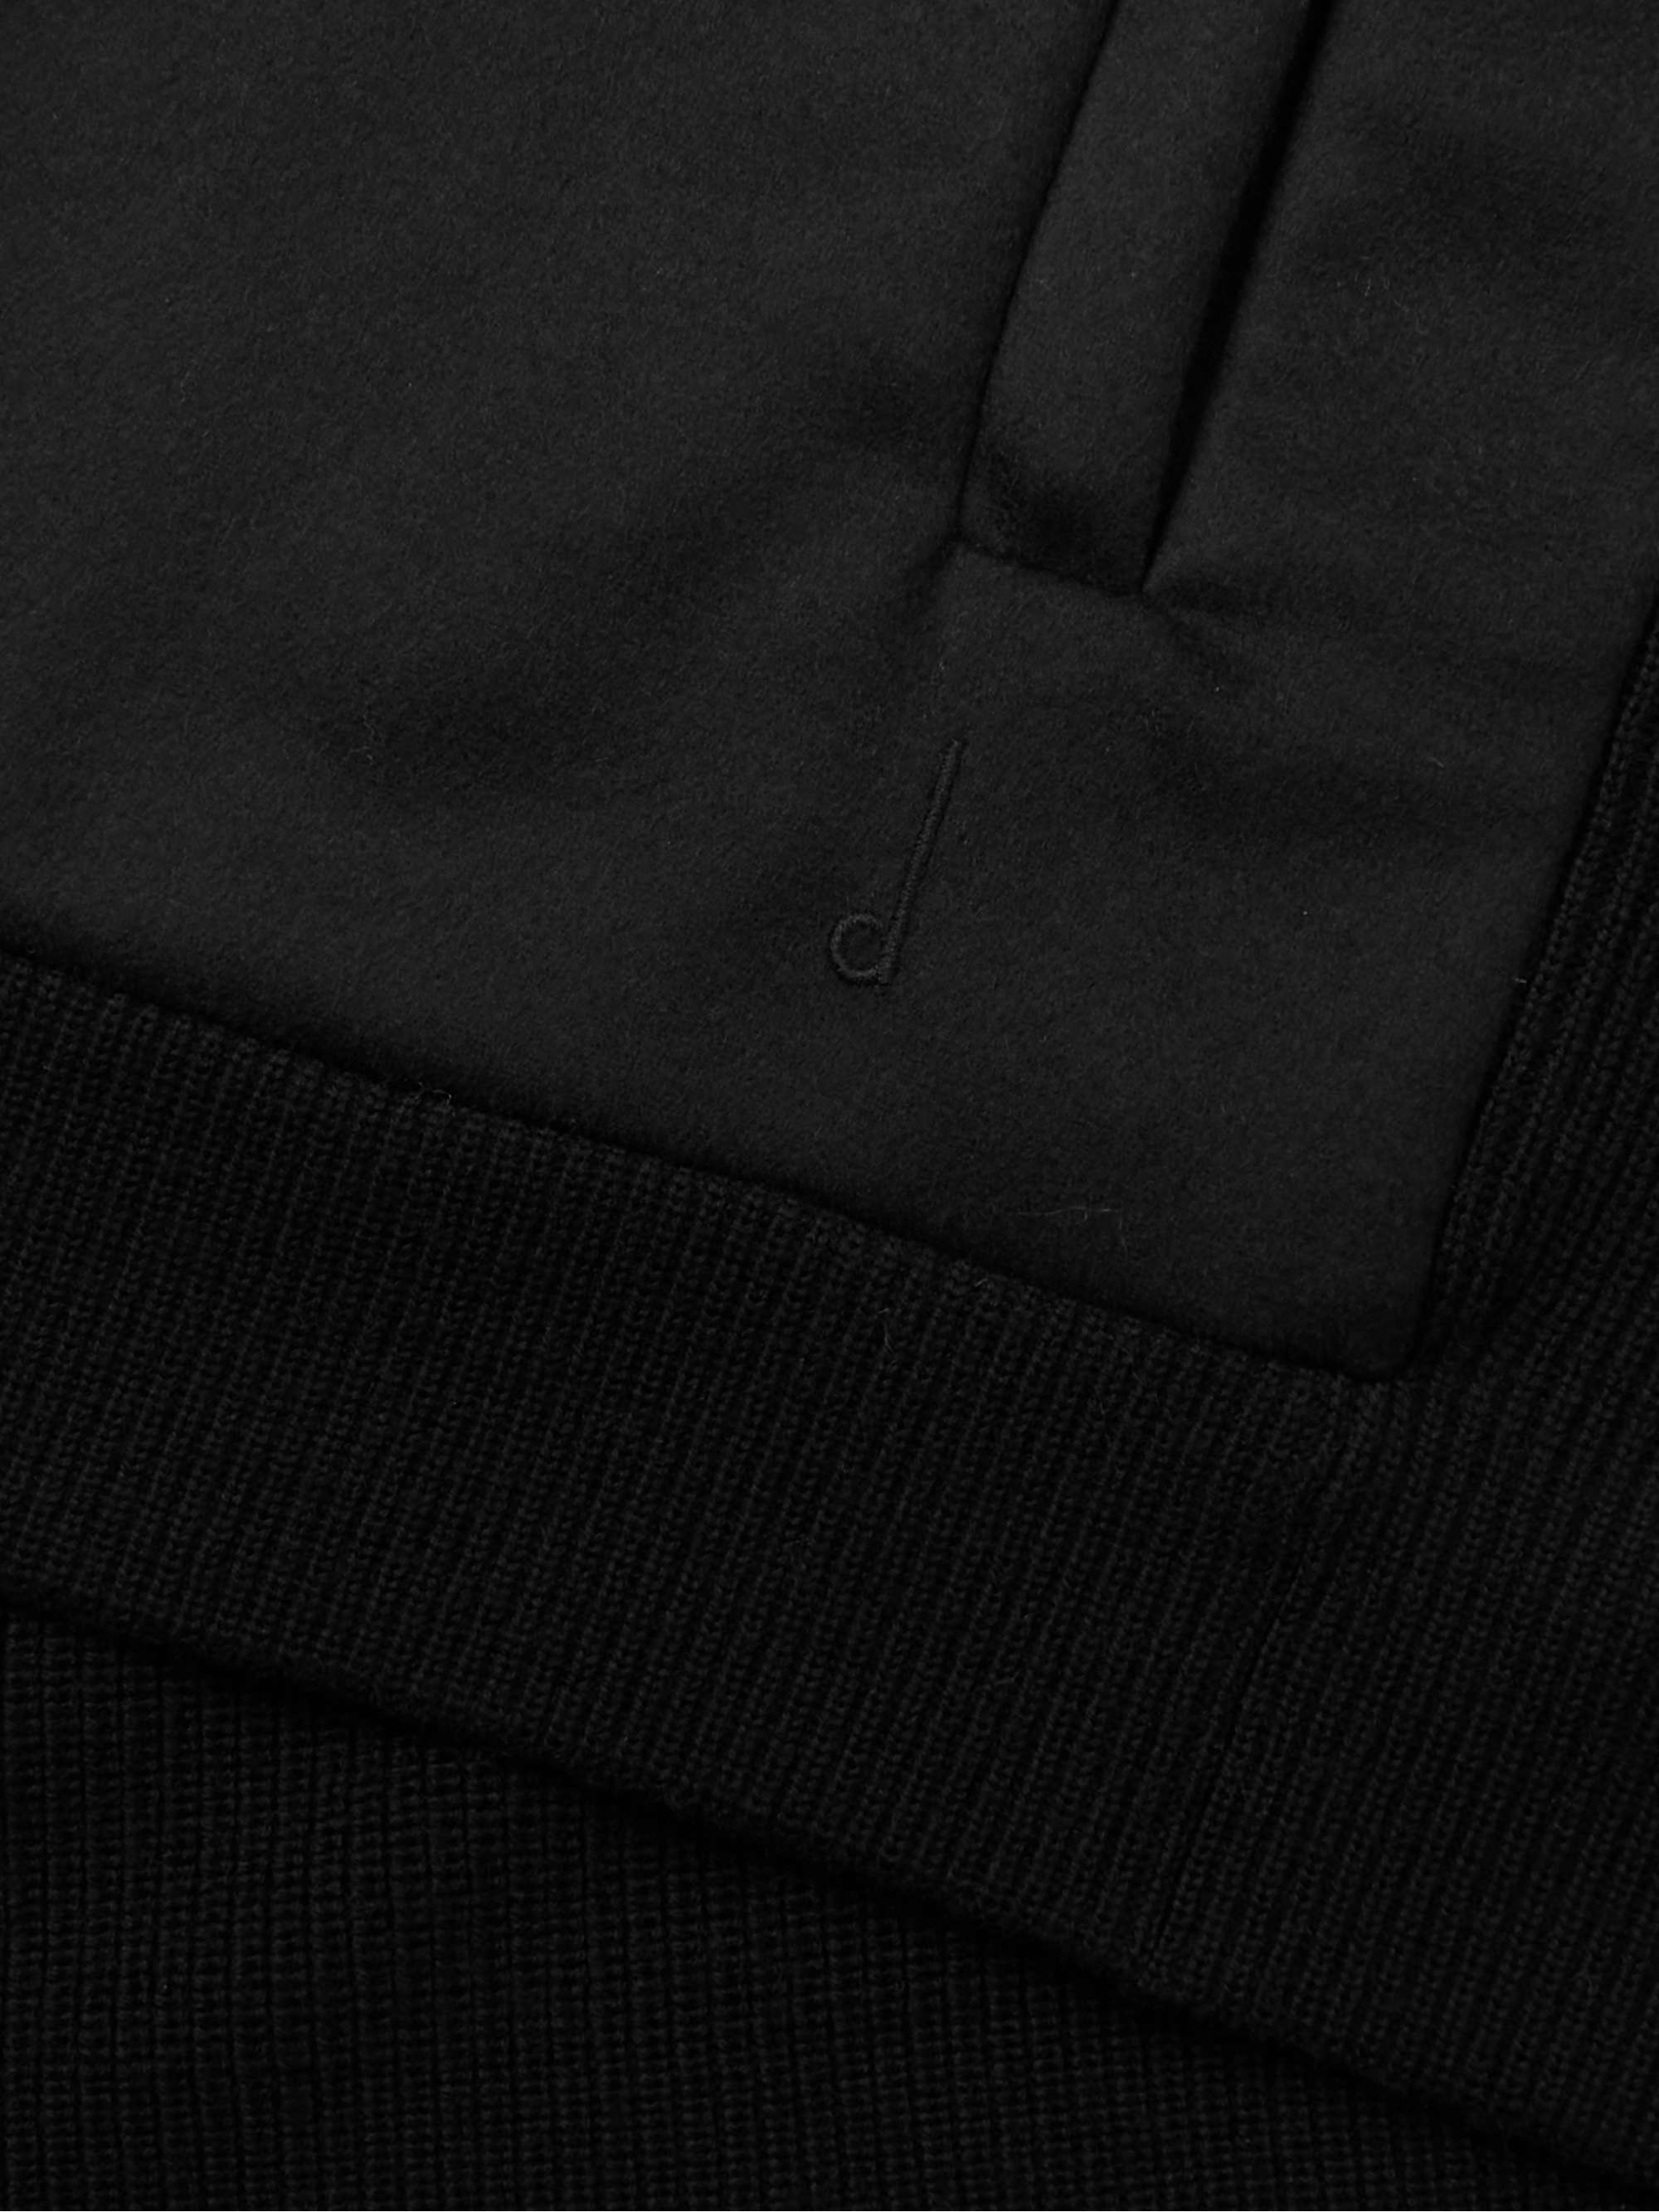 DUNHILL Slim-Fit Panelled Wool and Cashmere Jacket